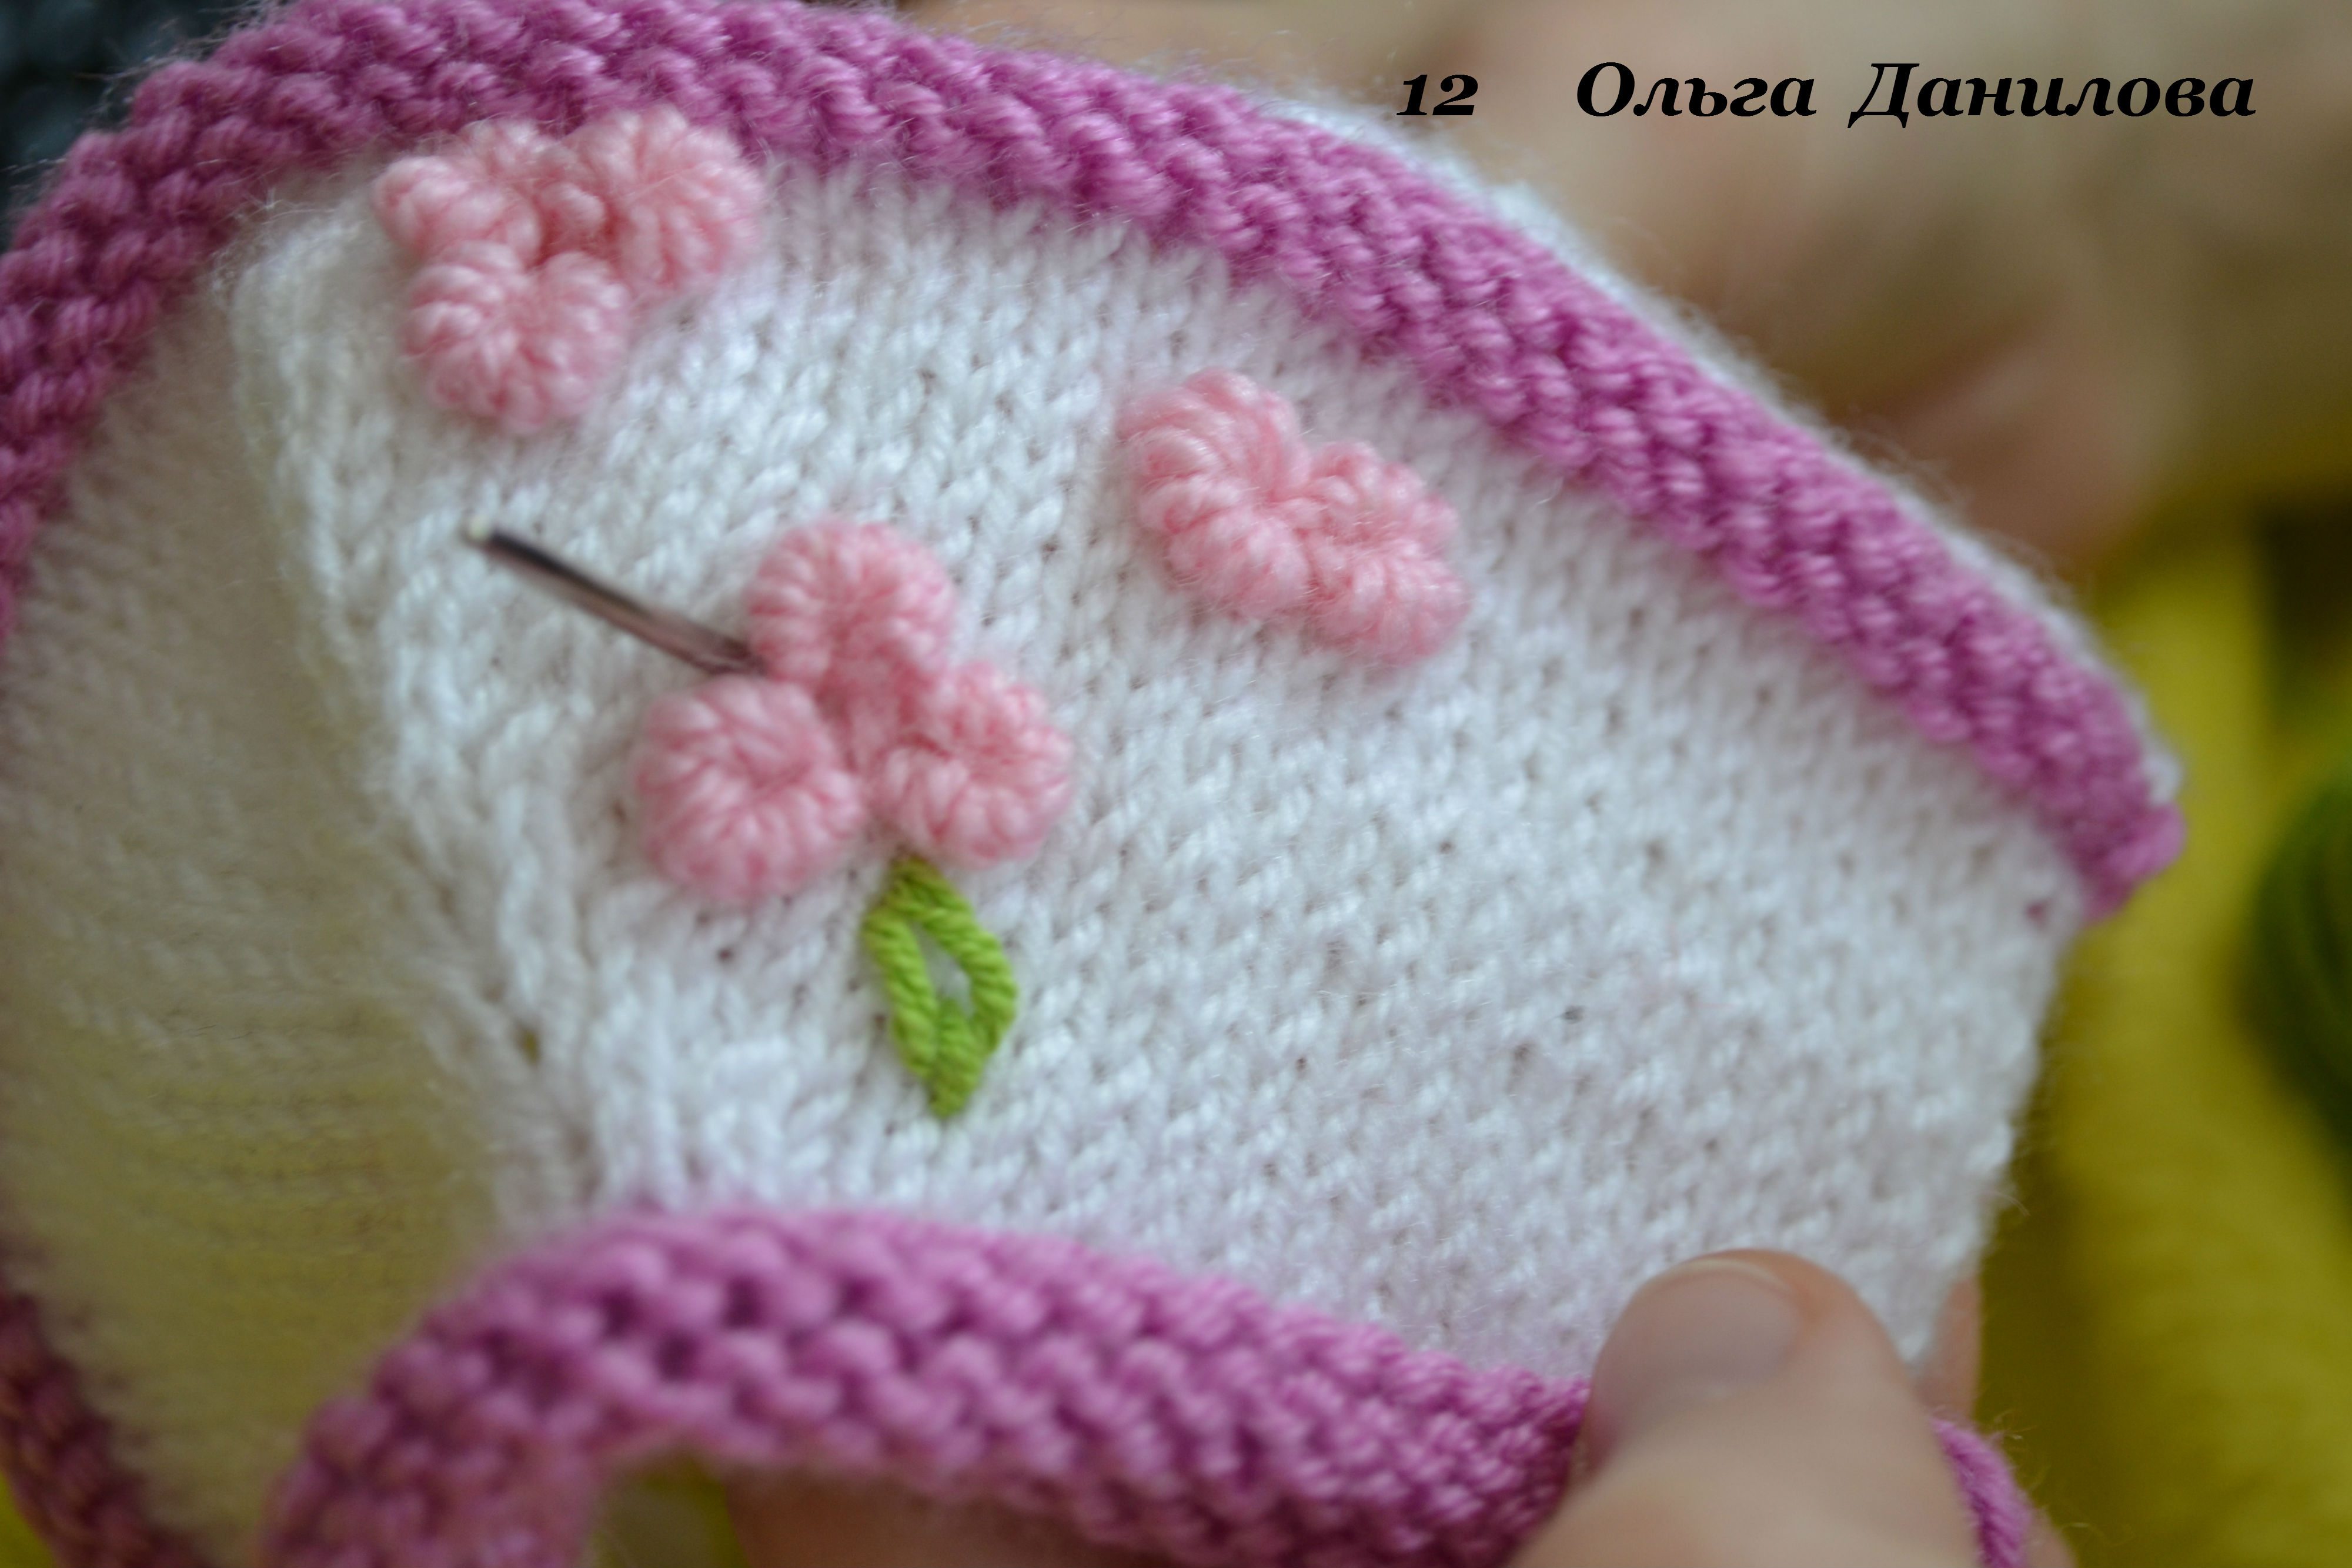 How-to-Make-Pretty-Knitted-Baby-Booties-14.jpg